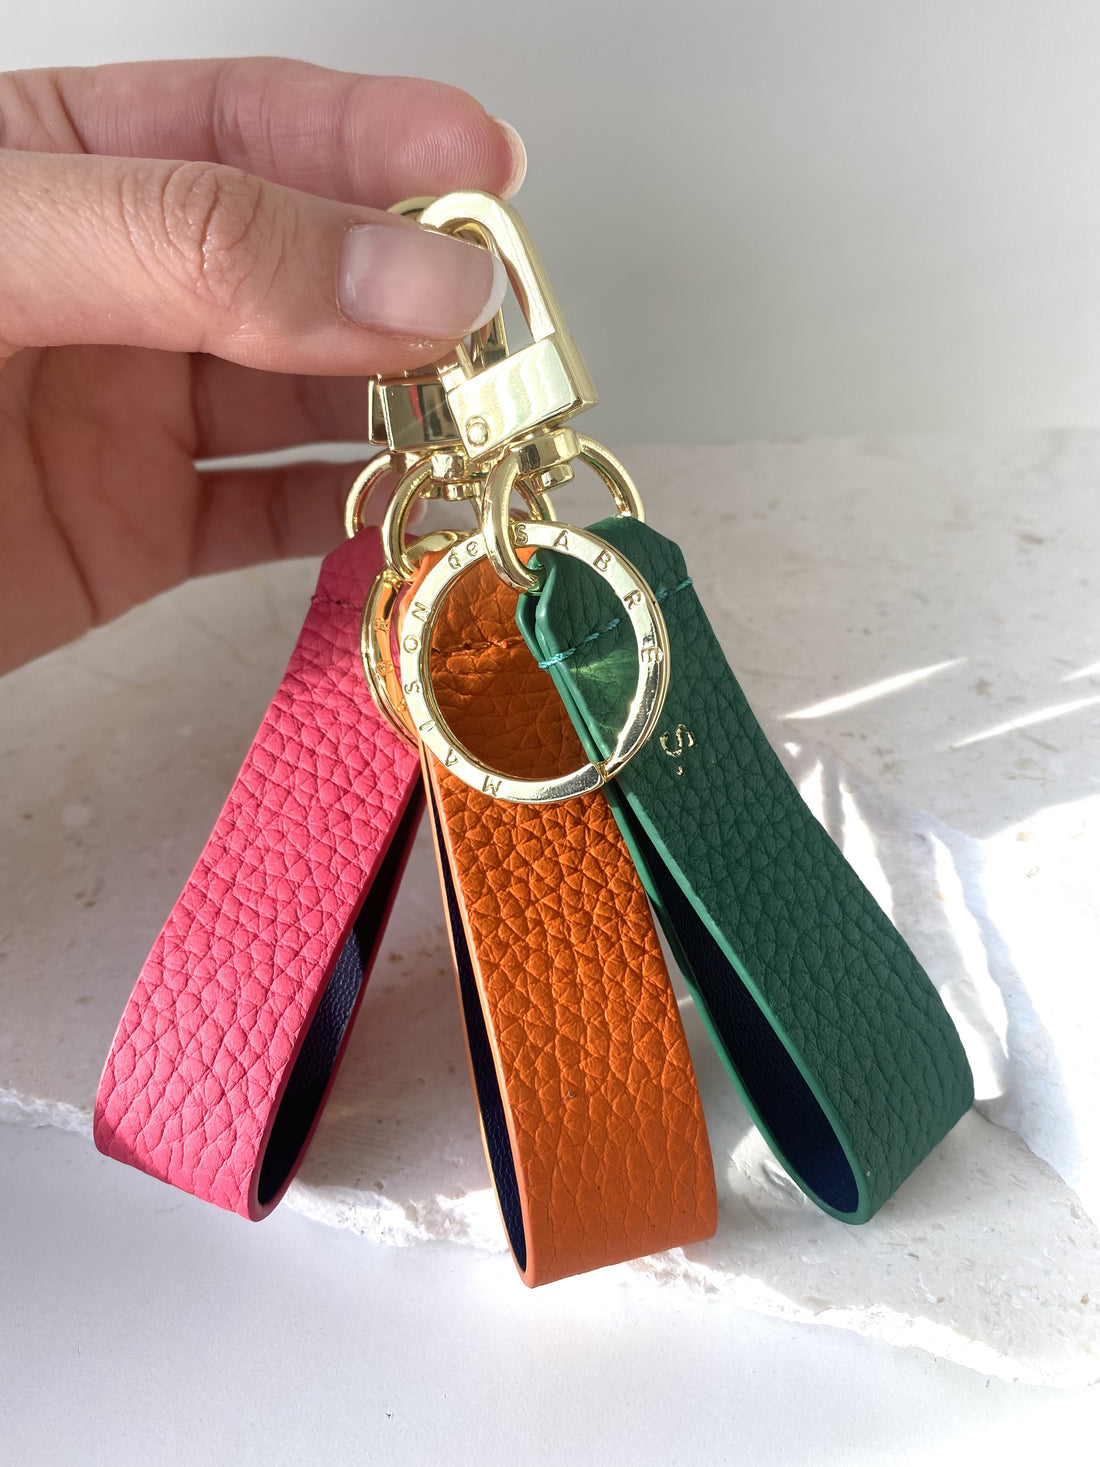 The Upcycled Keychain: Reducing Impact and Improving Product